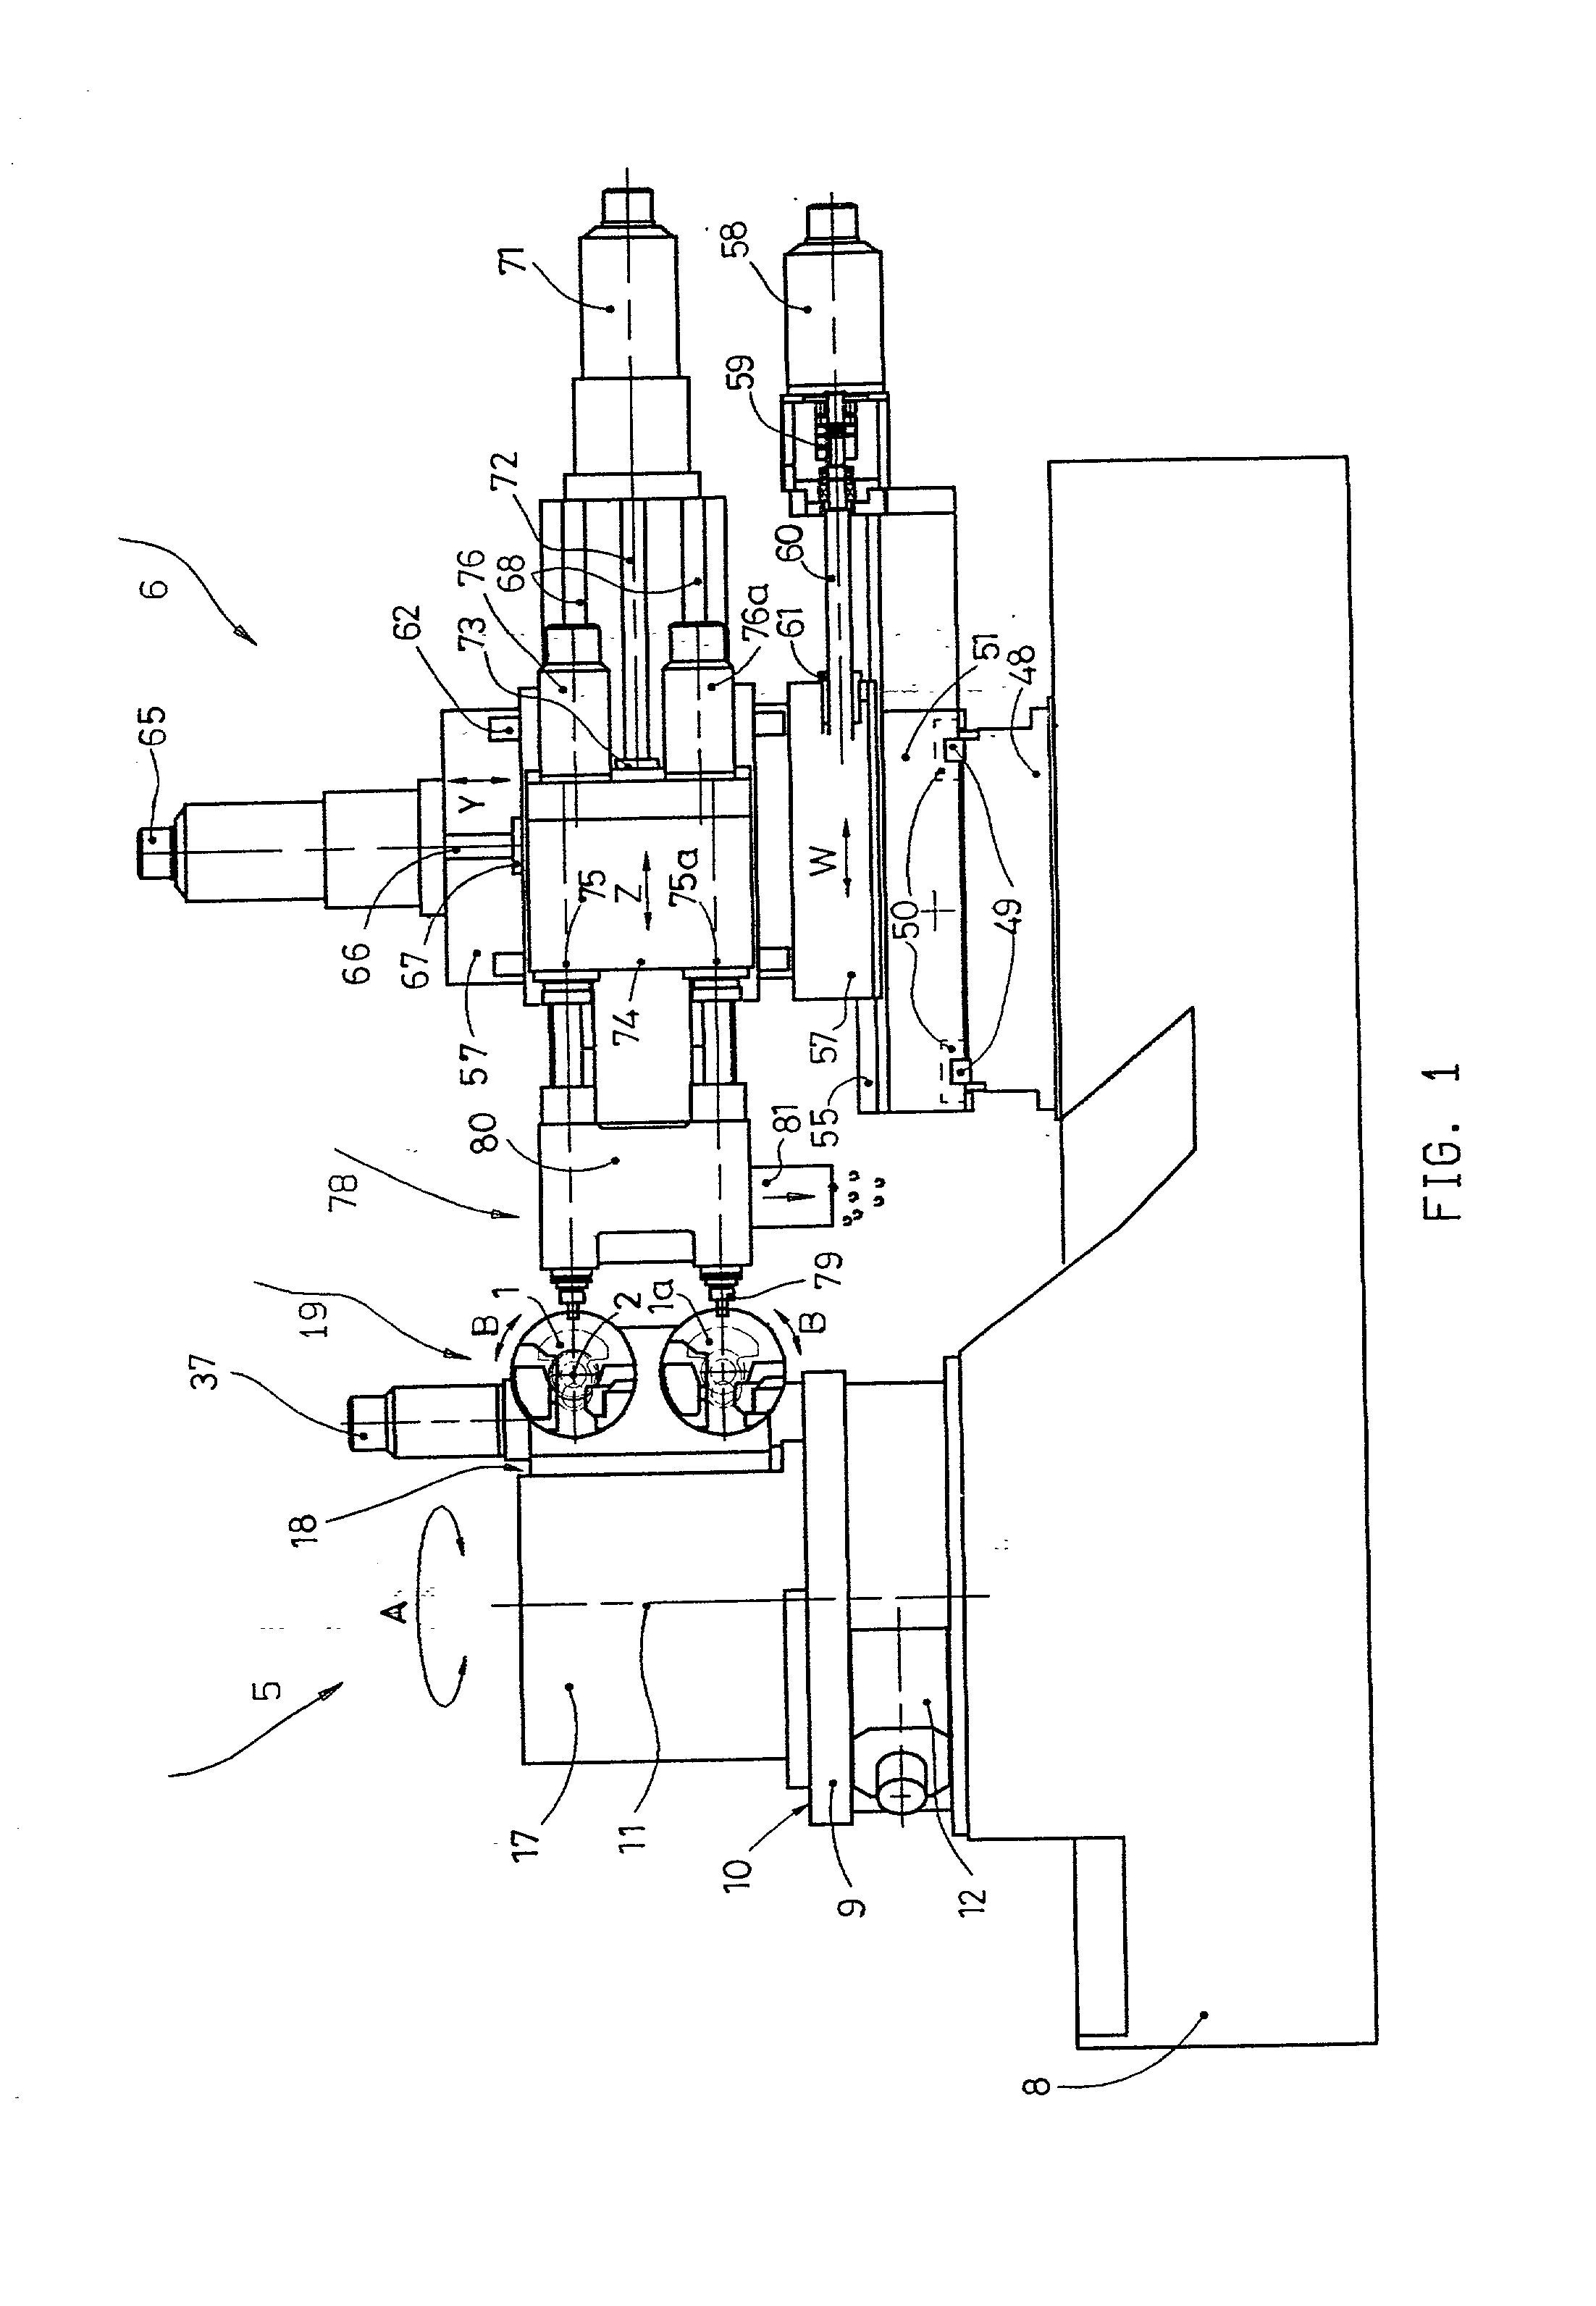 Machine for drilling oil-holes in crankshafts and its process